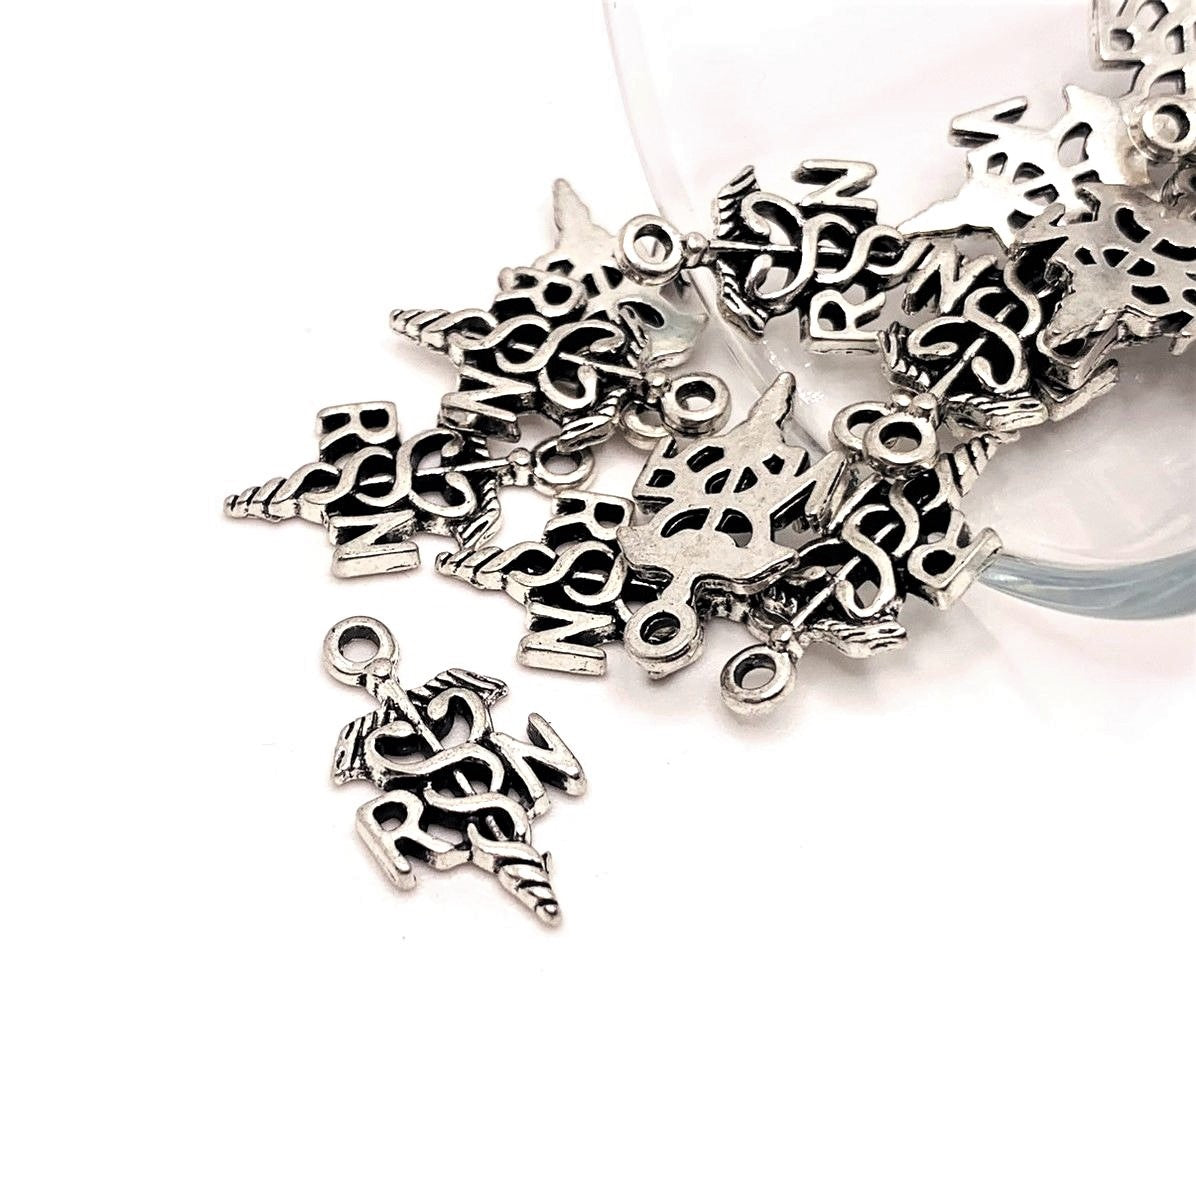 4, 20 or 50 Pieces: Silver RN with Caduceus Charms